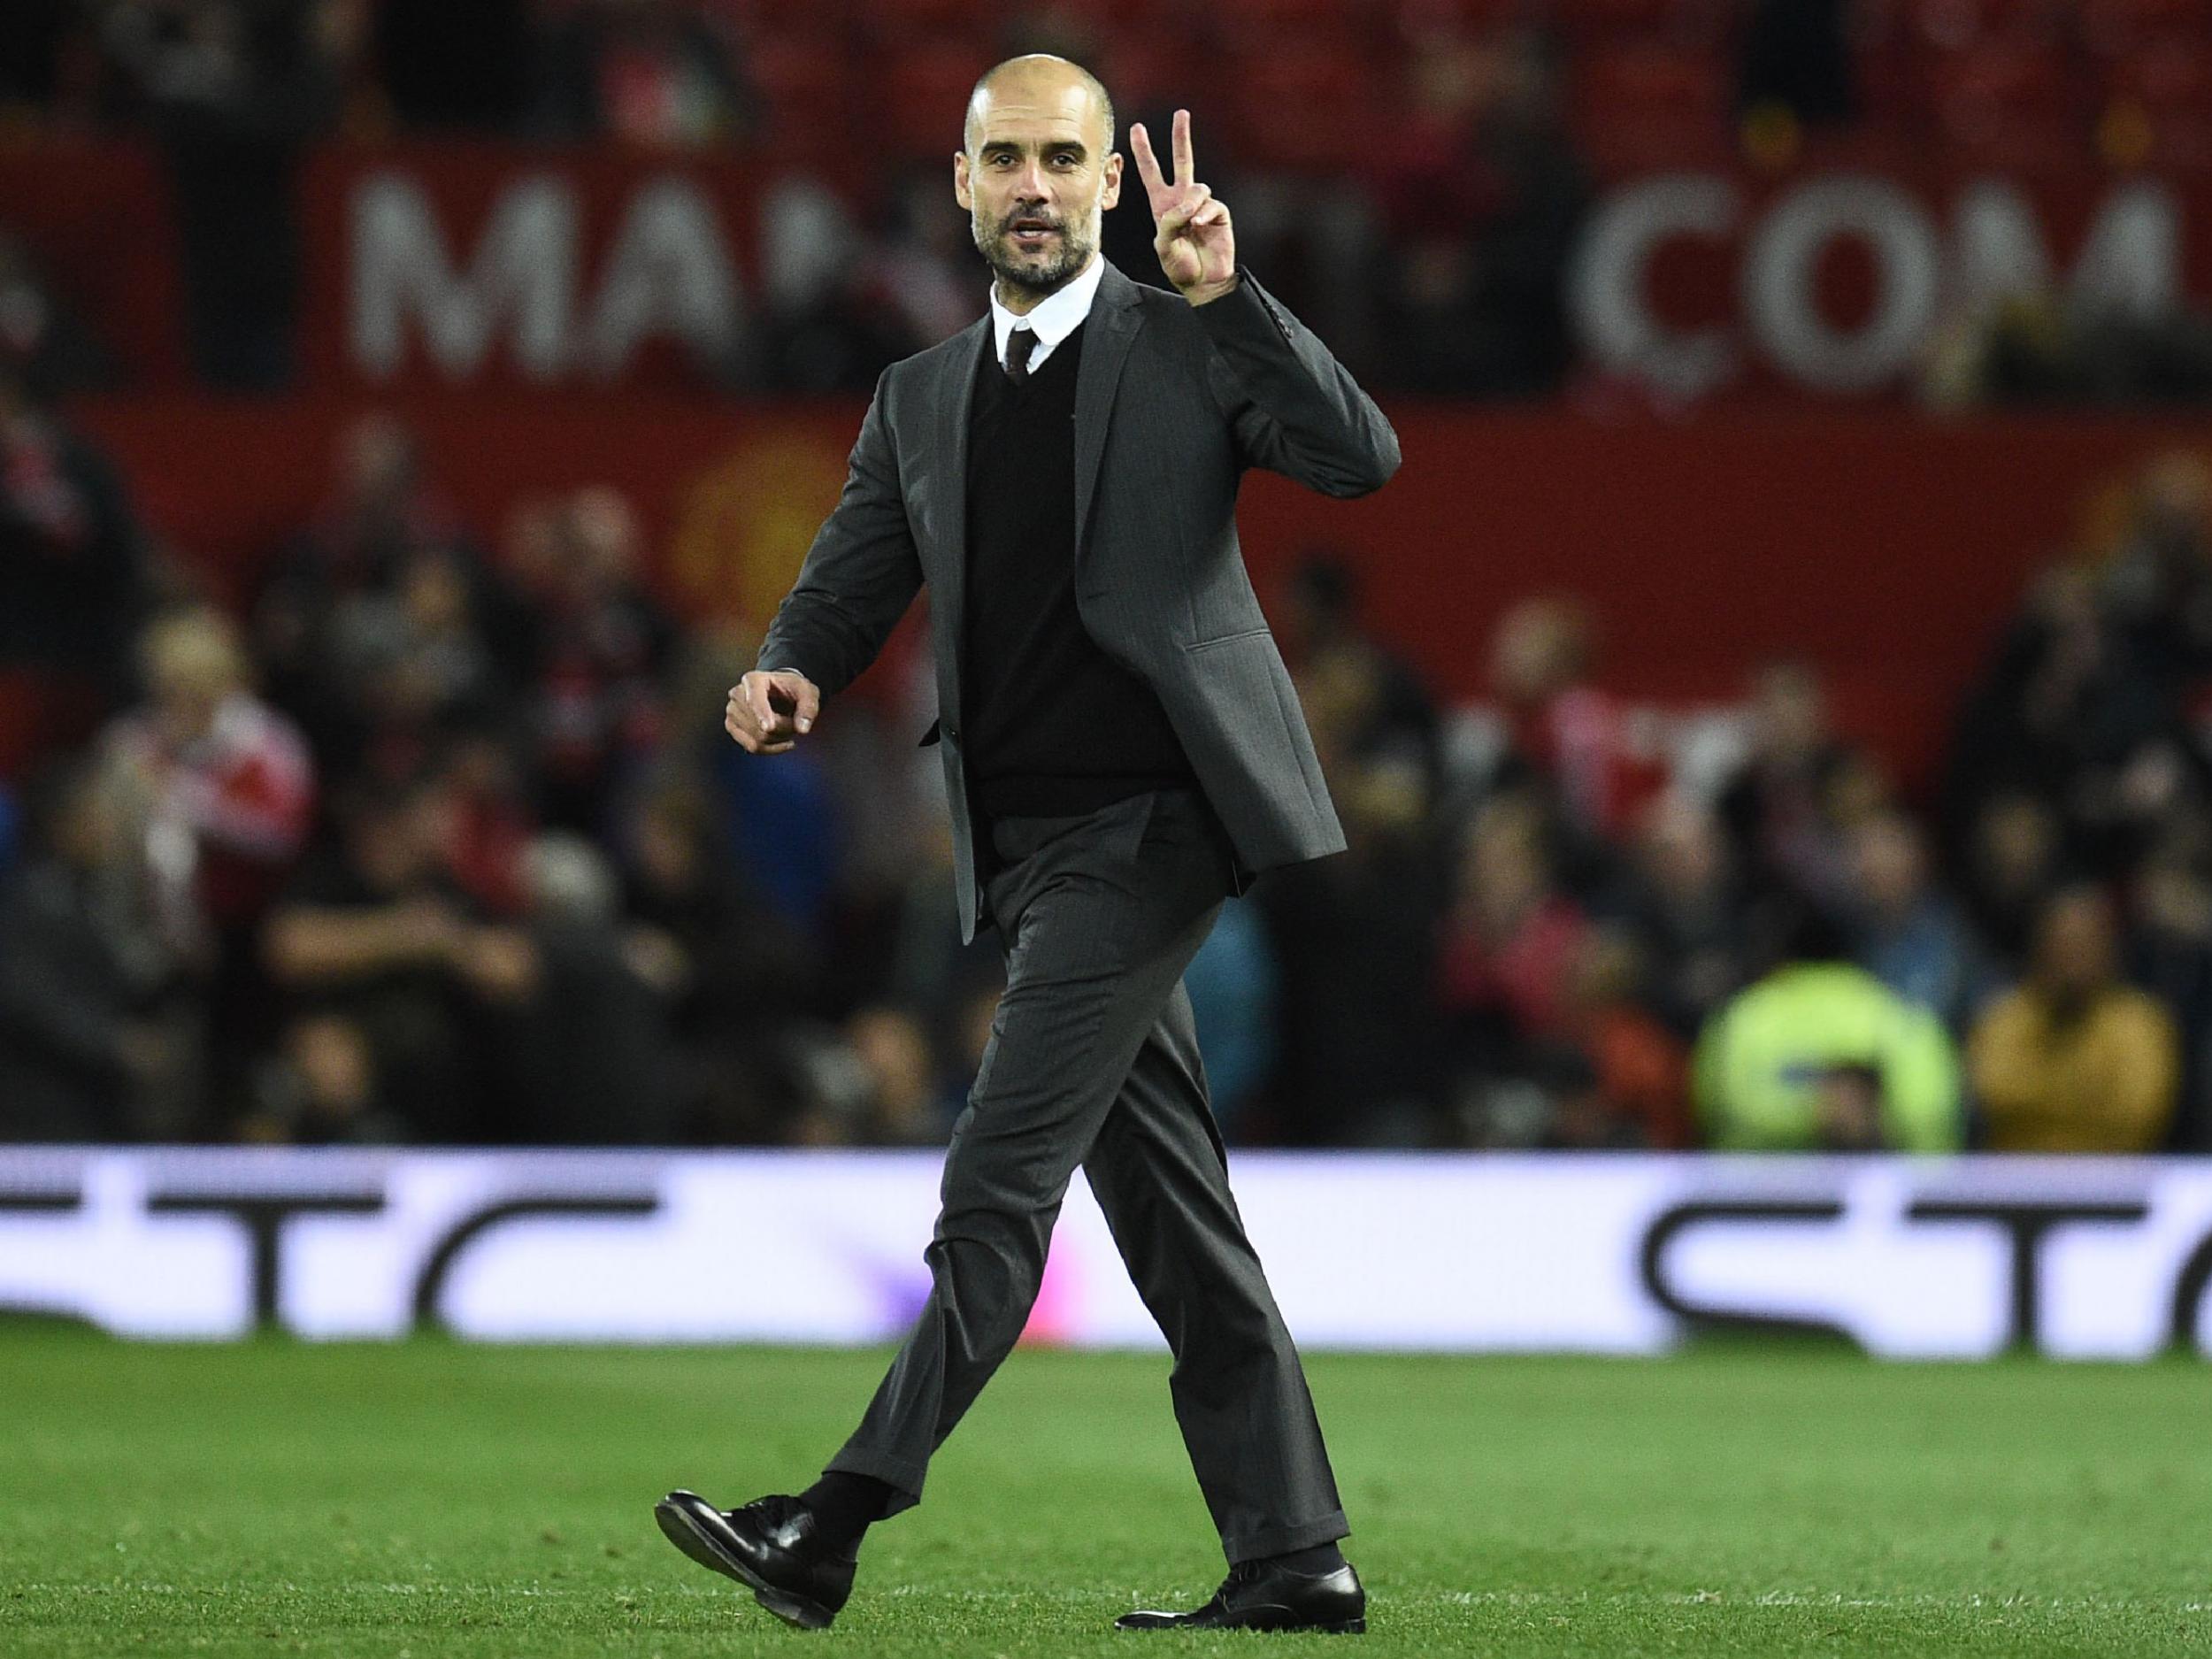 Guardiola has gone six games without a win for the first time ever